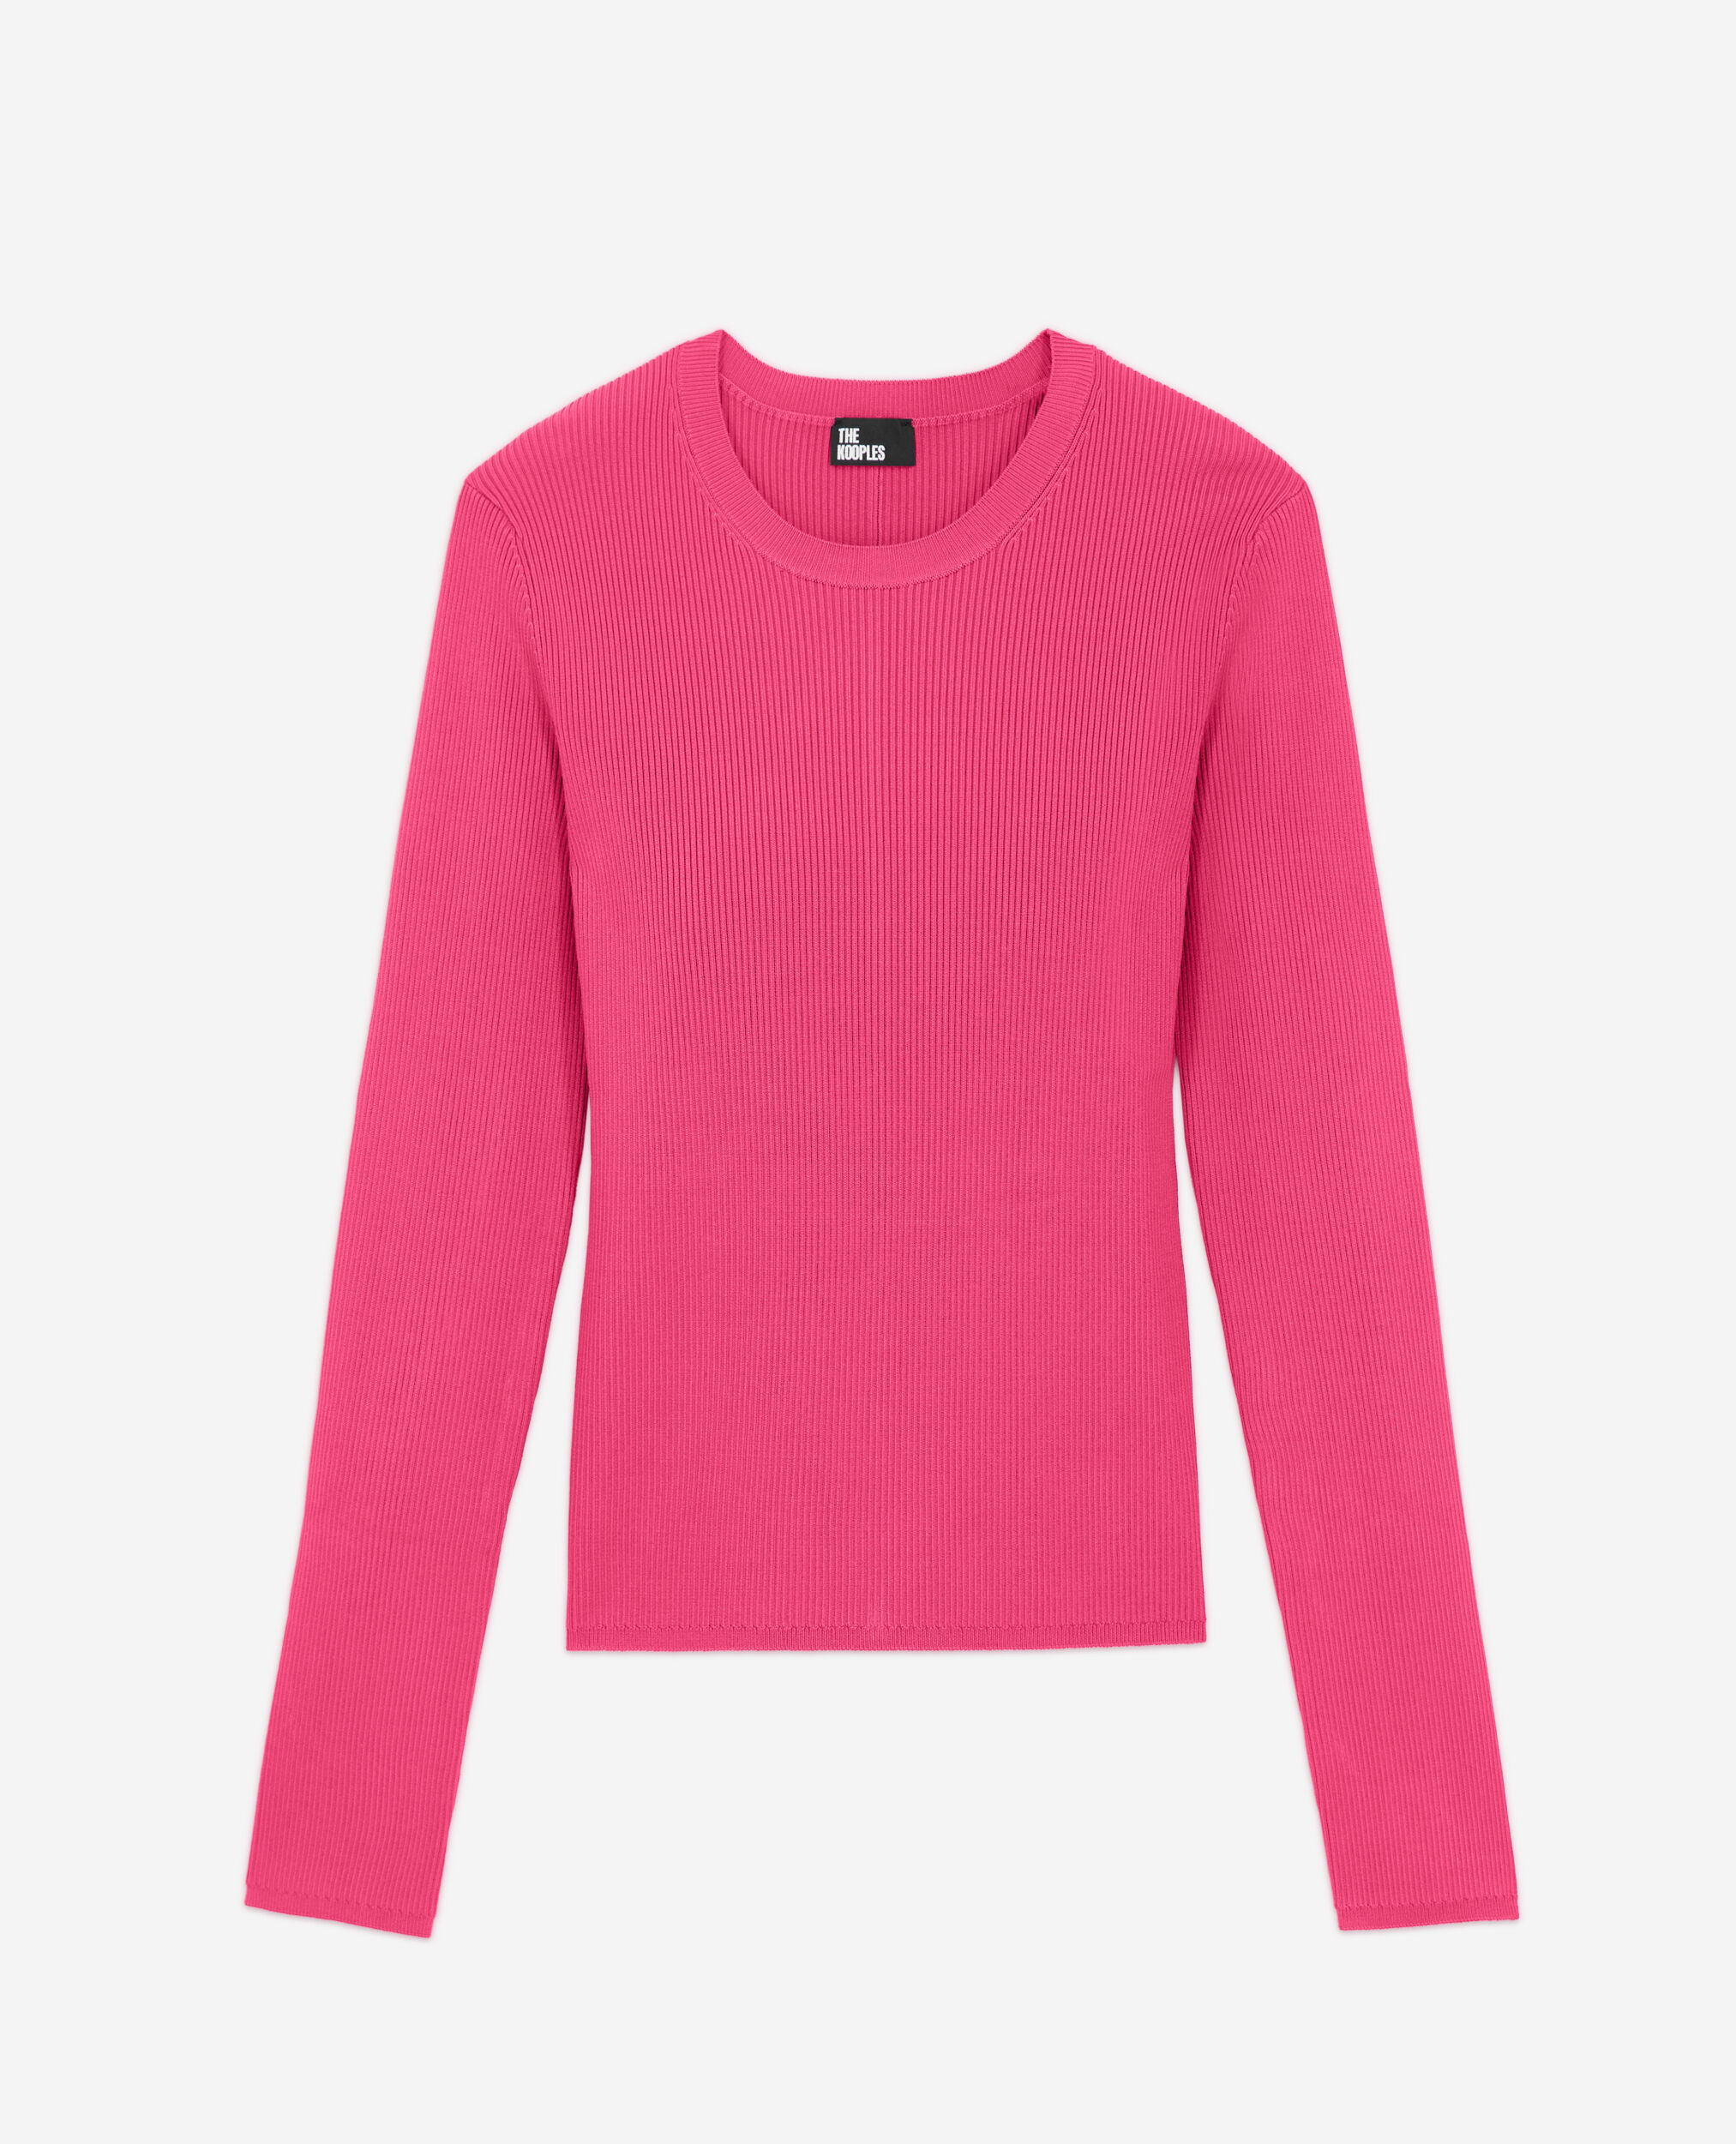 Pink crew neck sweater, PINK, hi-res image number null